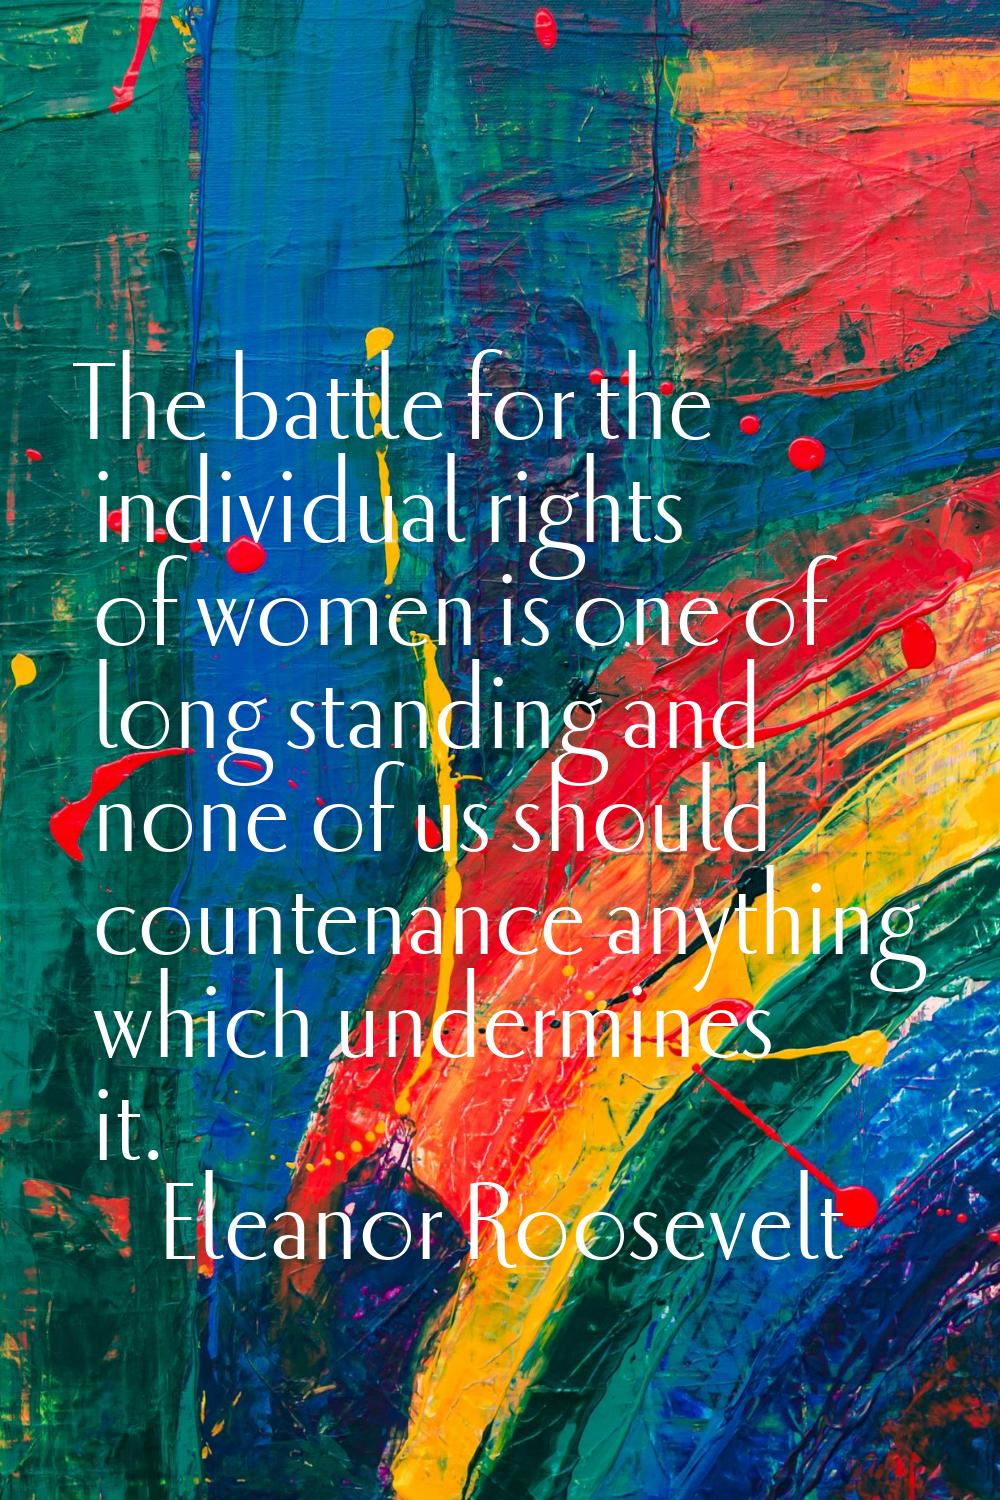 The battle for the individual rights of women is one of long standing and none of us should counten